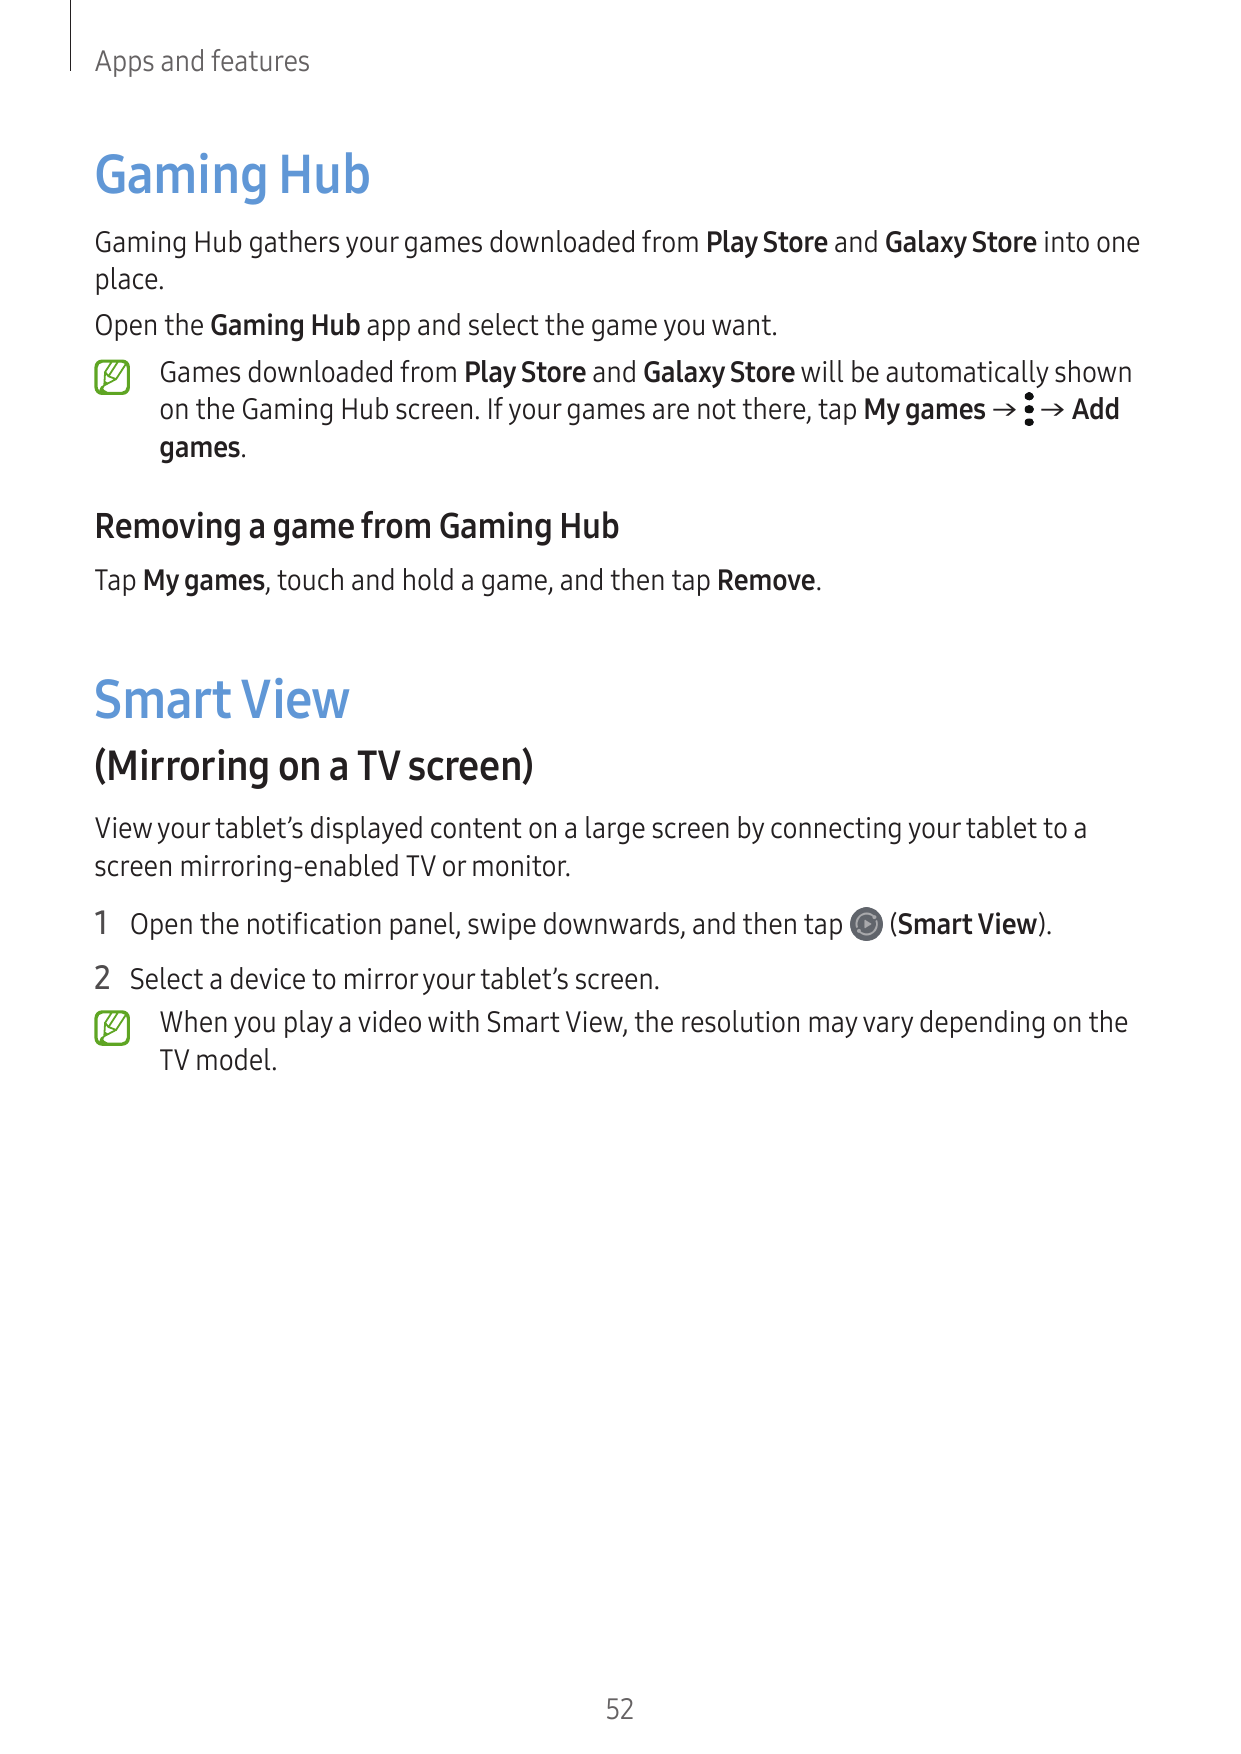 Apps and featuresGaming HubGaming Hub gathers your games downloaded from Play Store and Galaxy Store into oneplace.Open the Gami